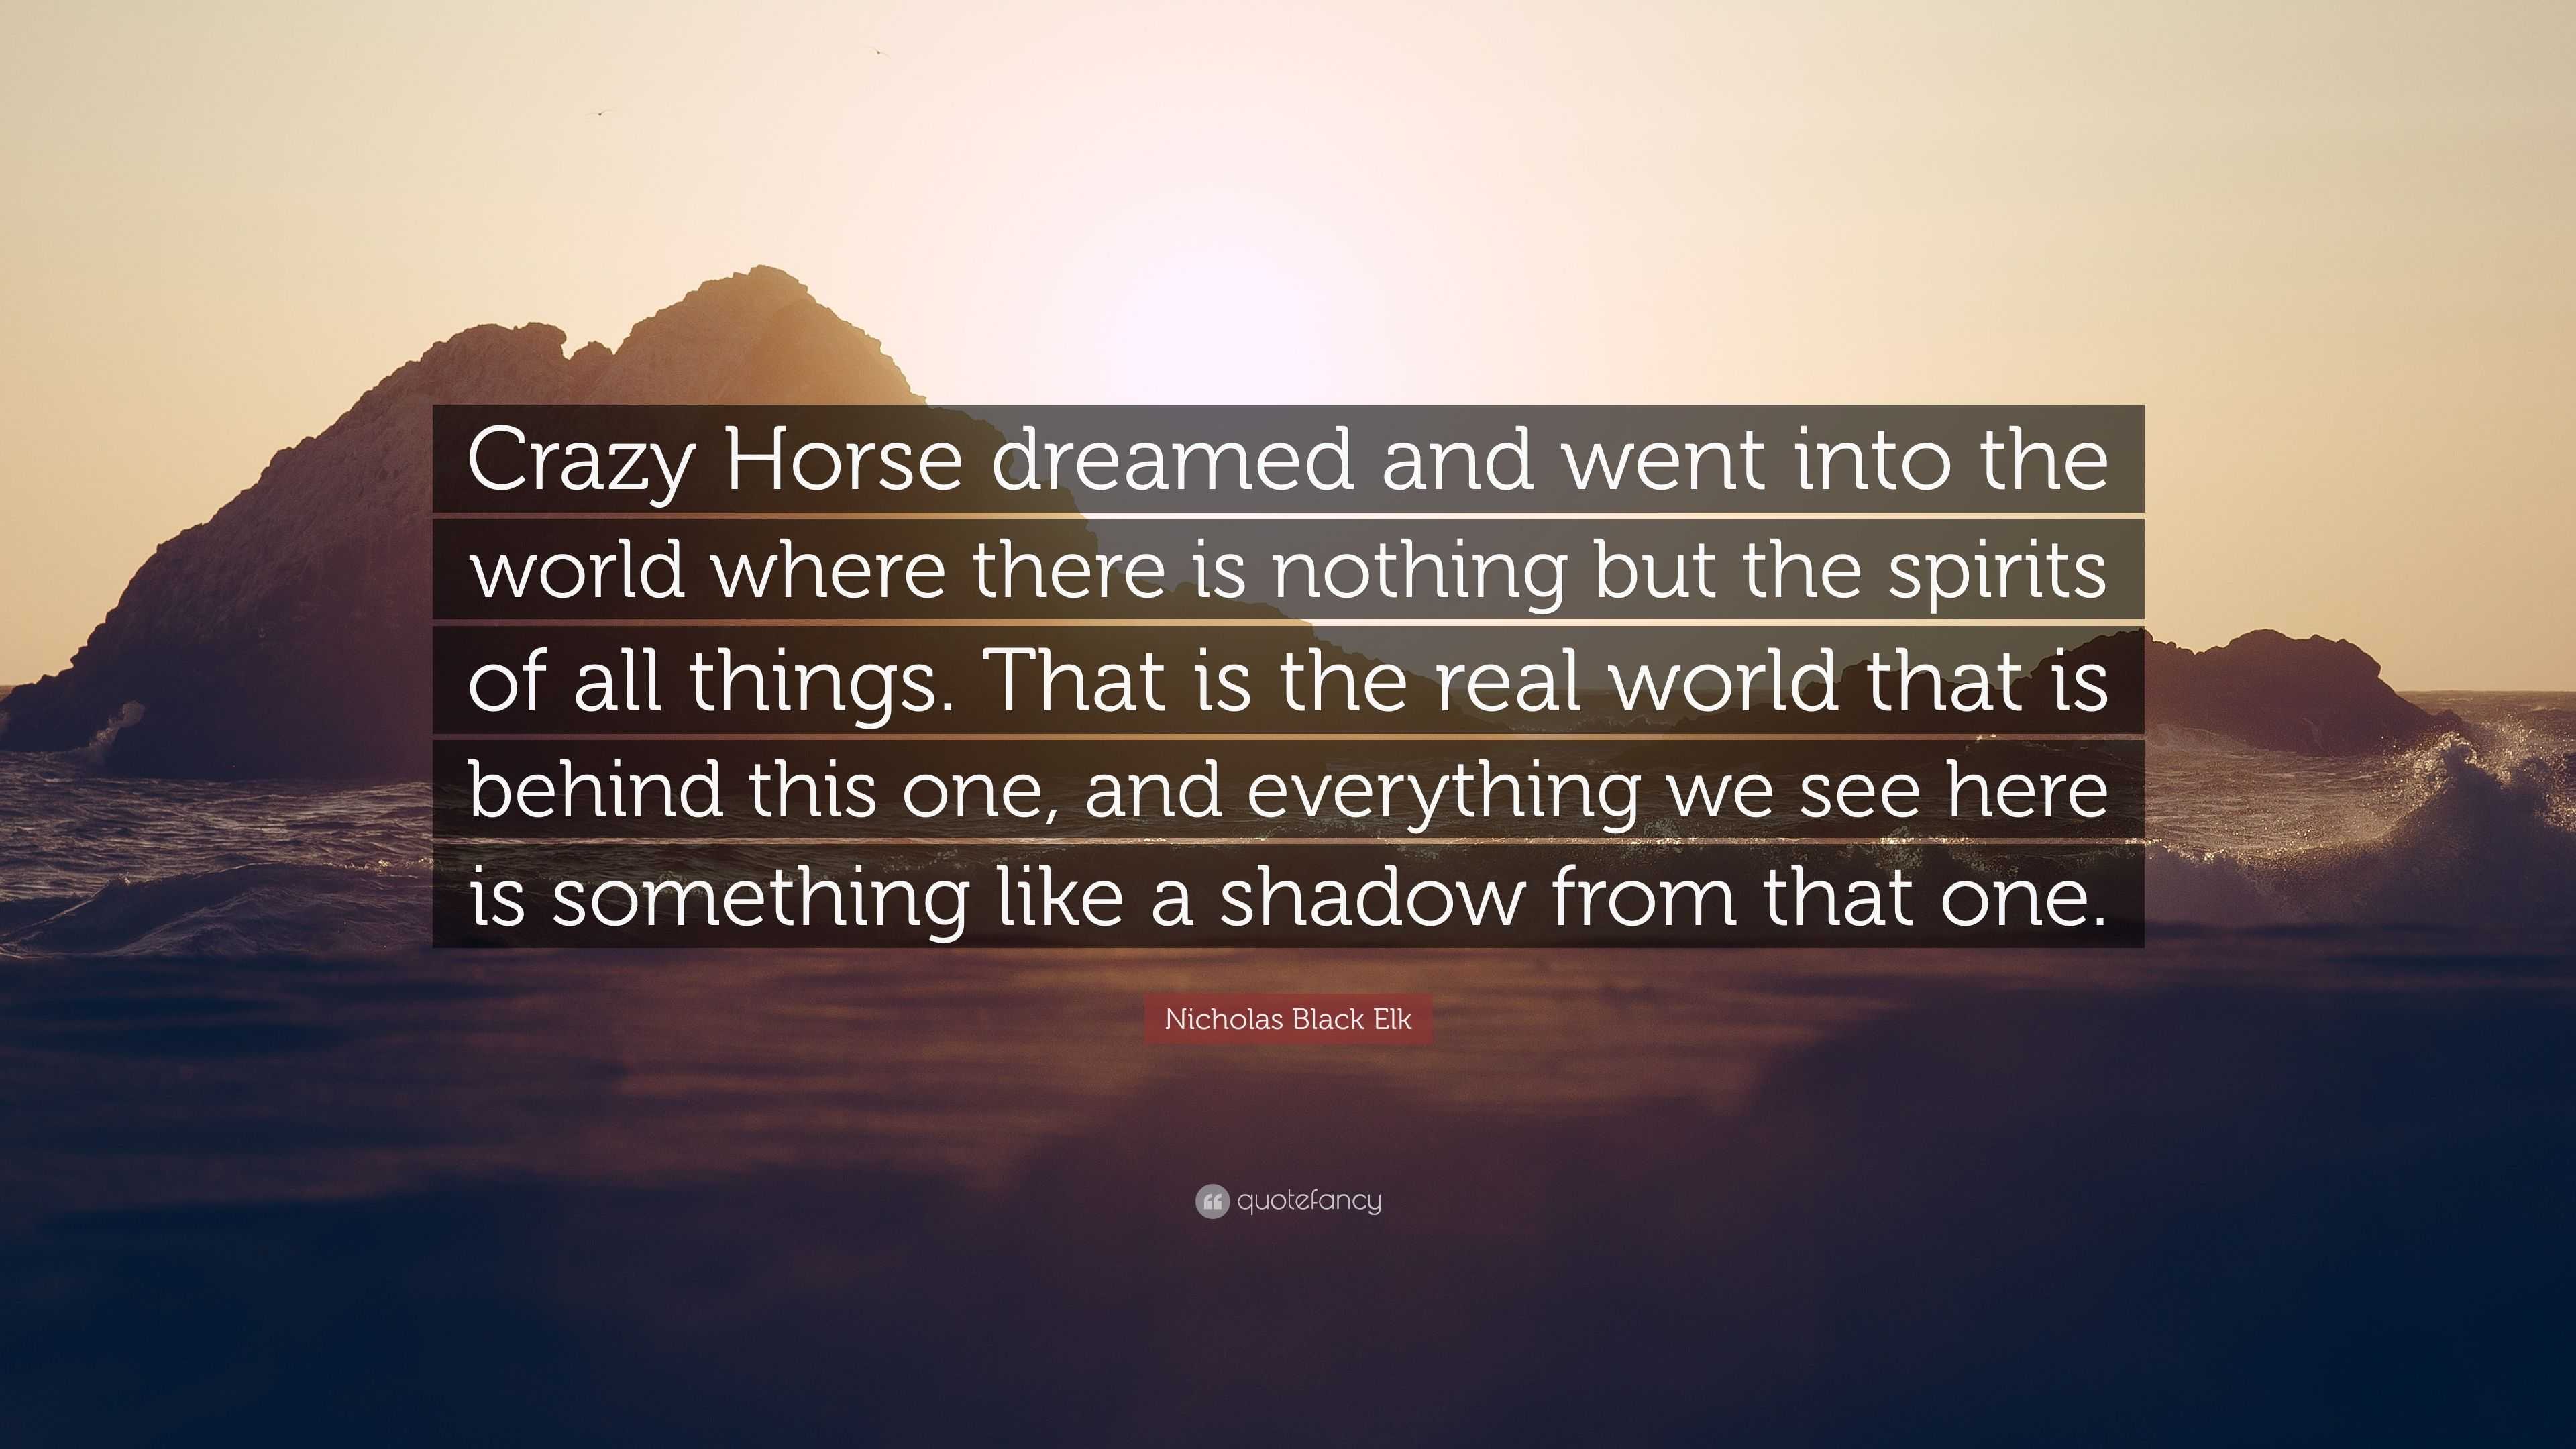 Nicholas Black Elk Quote: “Crazy Horse dreamed and went into the world ...